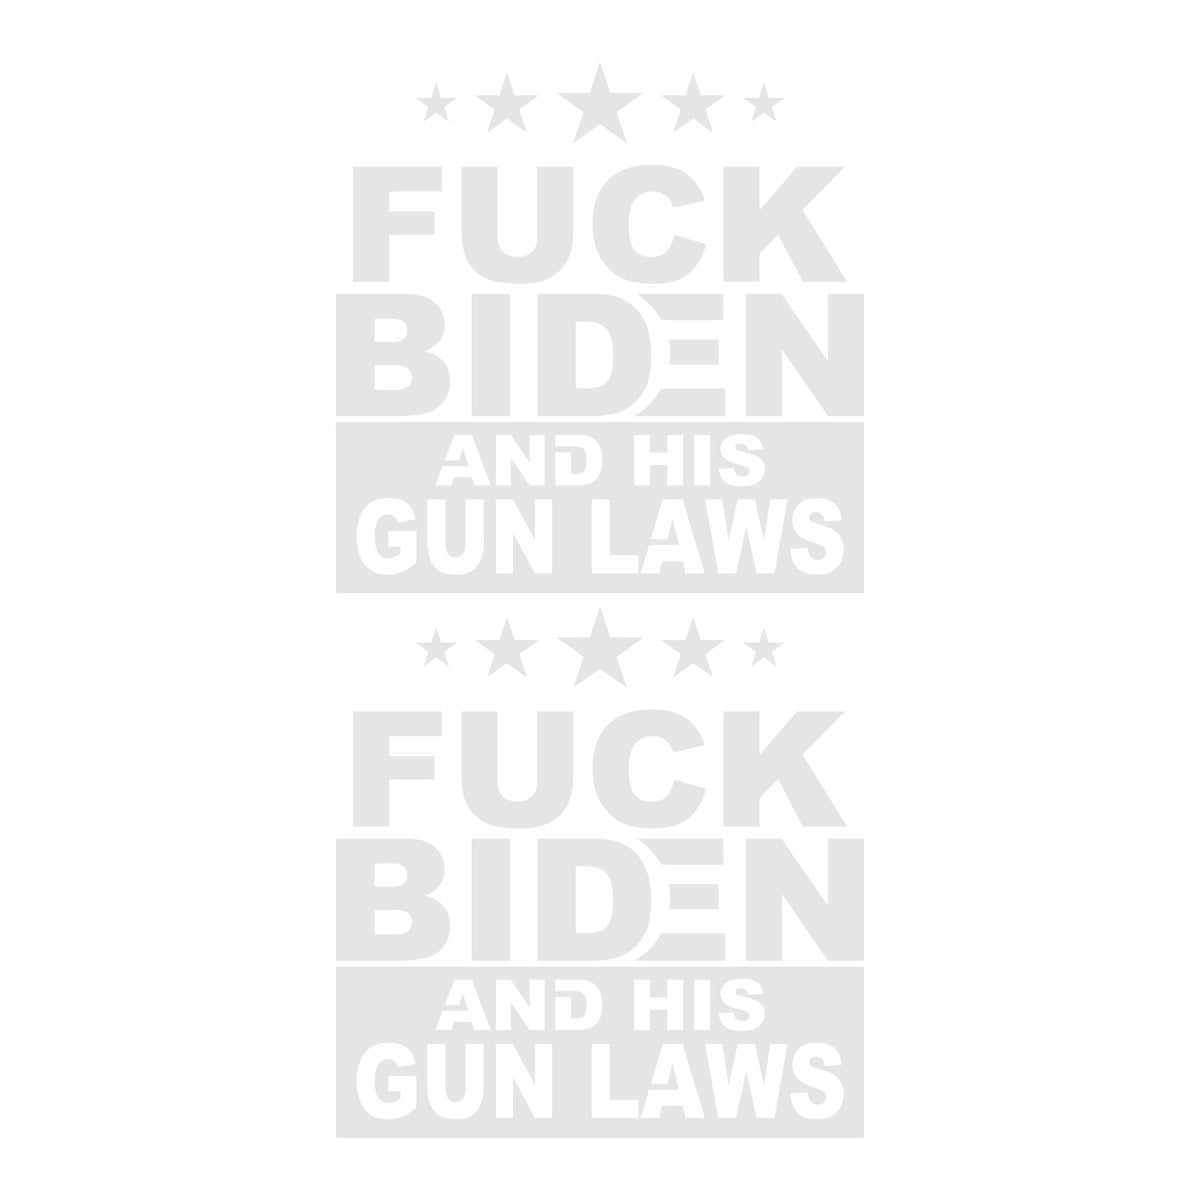 Fuck Biden and His Gun Laws - Pair of Vinyl Decals - Free Shipping